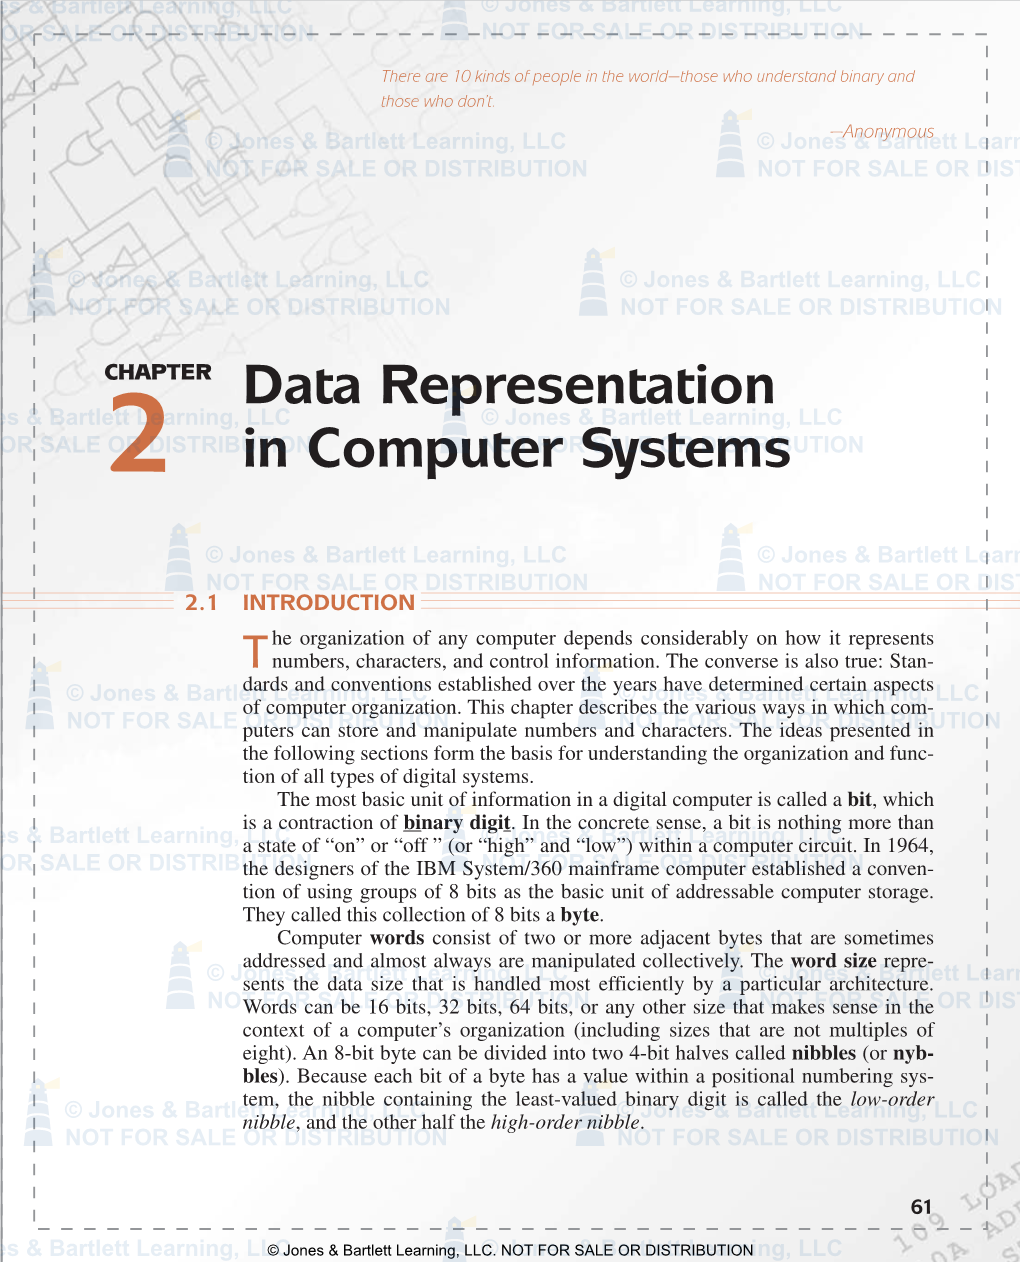 Data Representation in Computer Systems